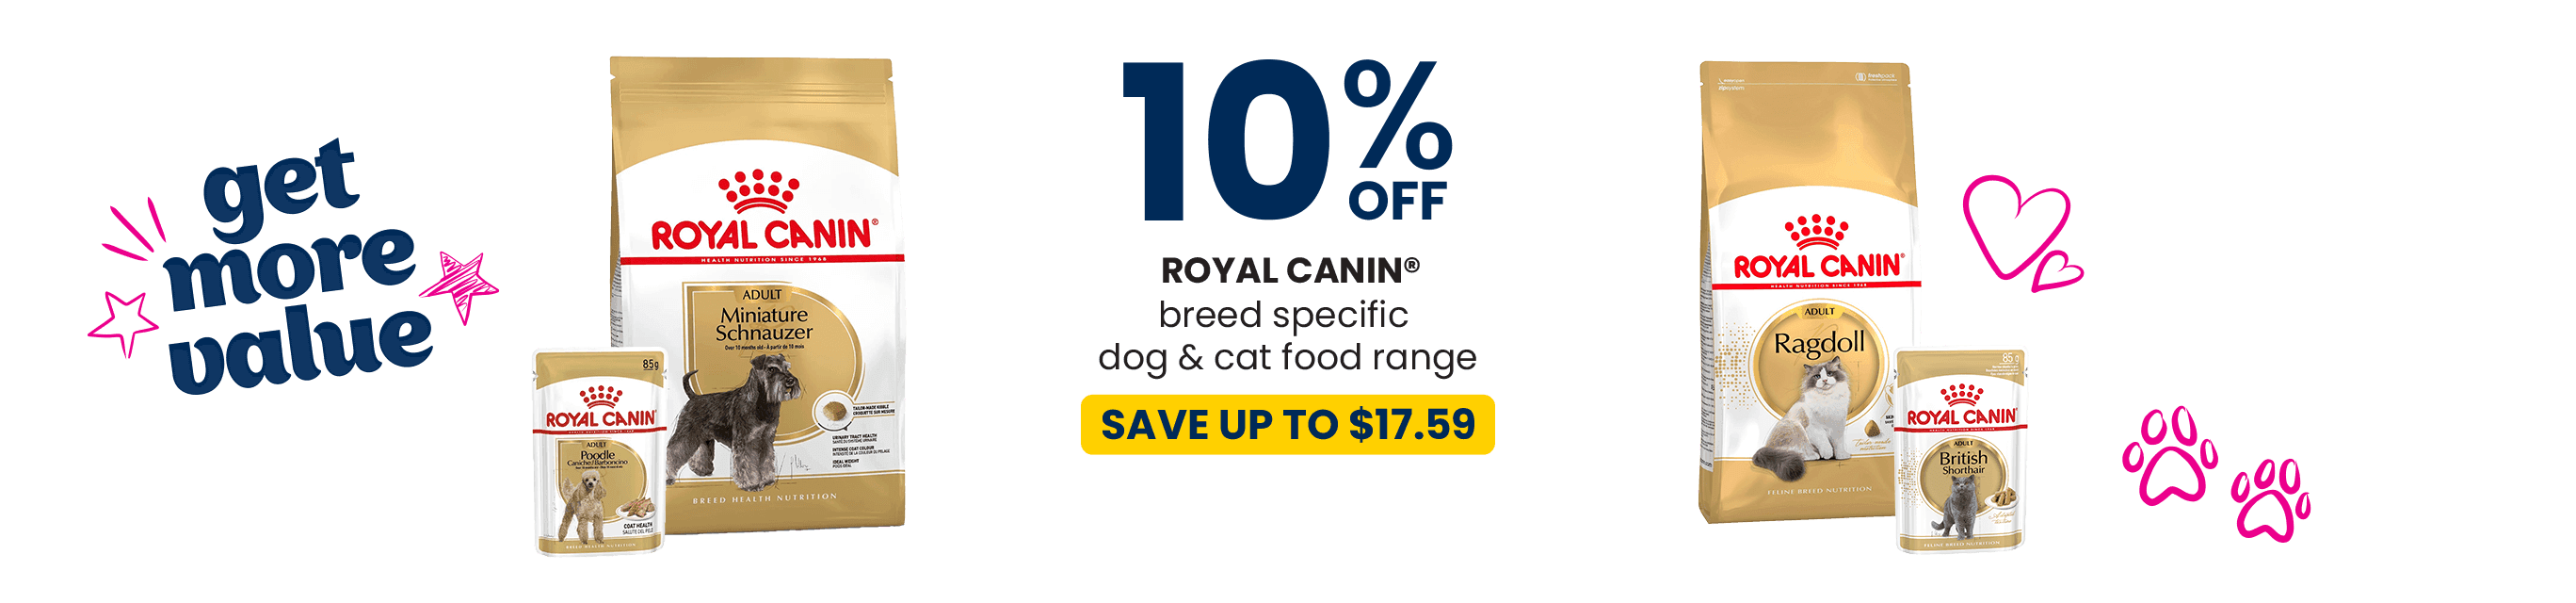 10% OFF - Royal Canin breed specific dog & cat food range. Save up to $17.59